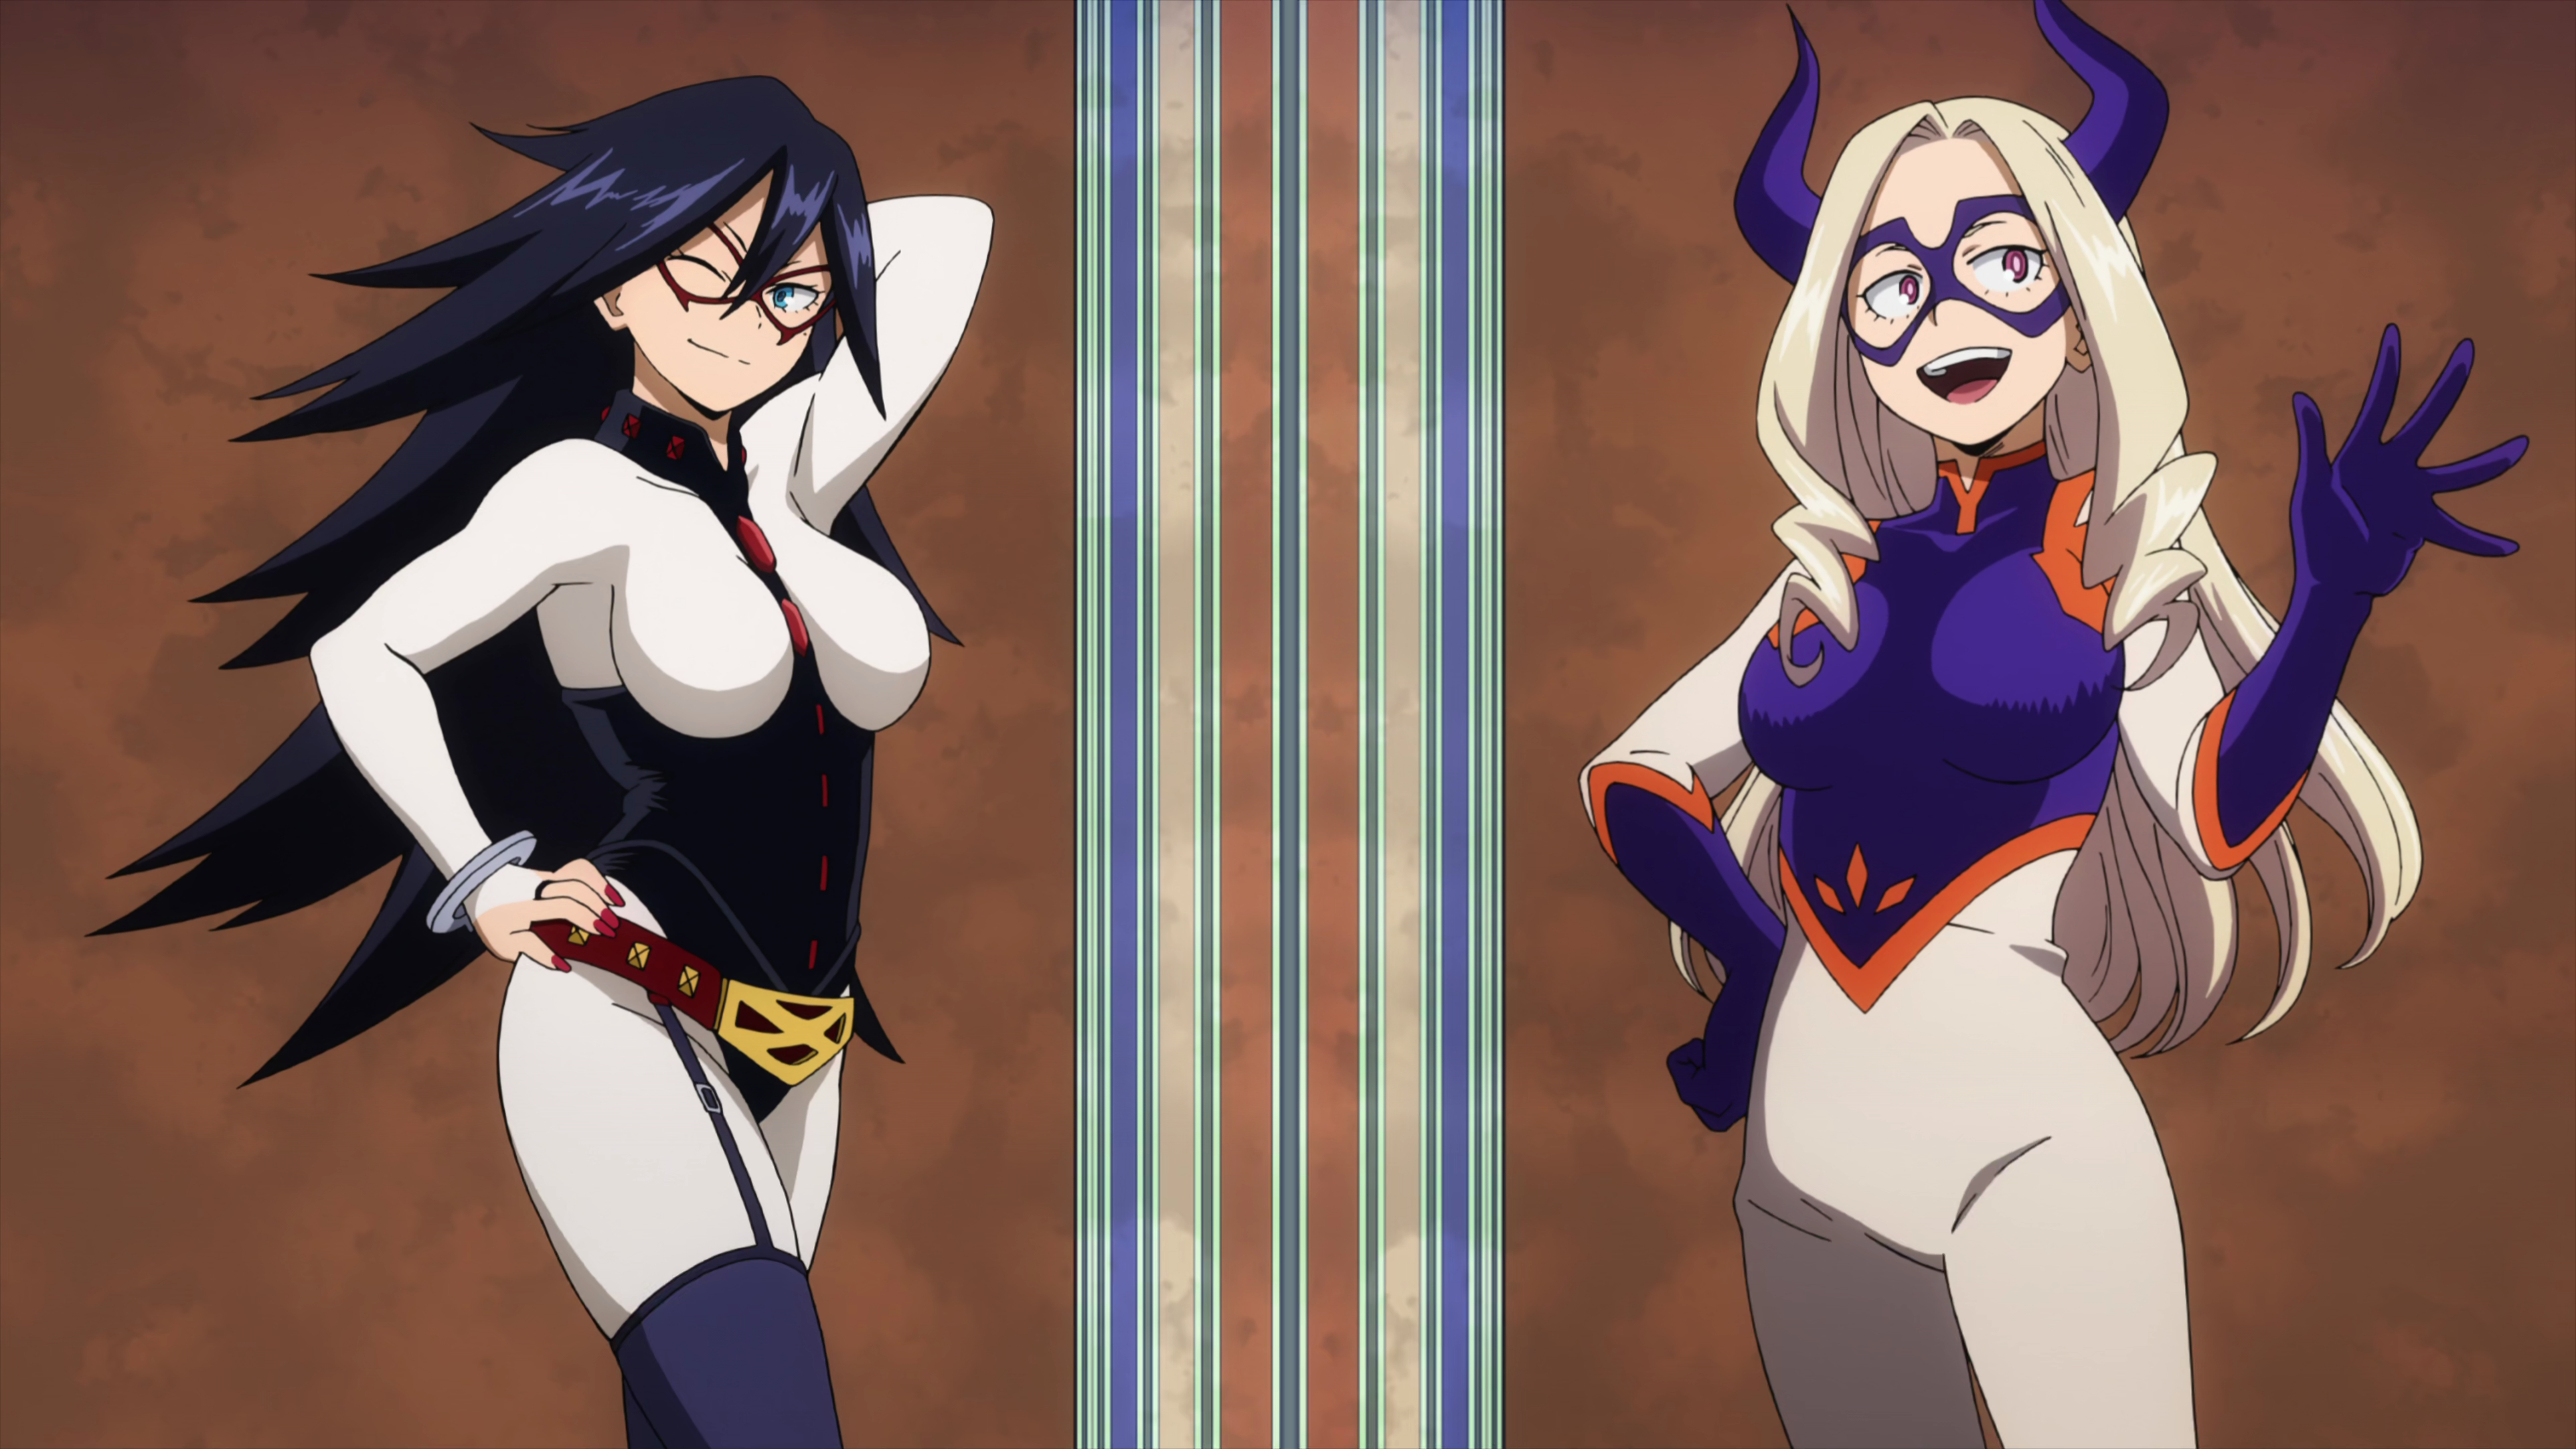 And these are my wives, also from MHA. 